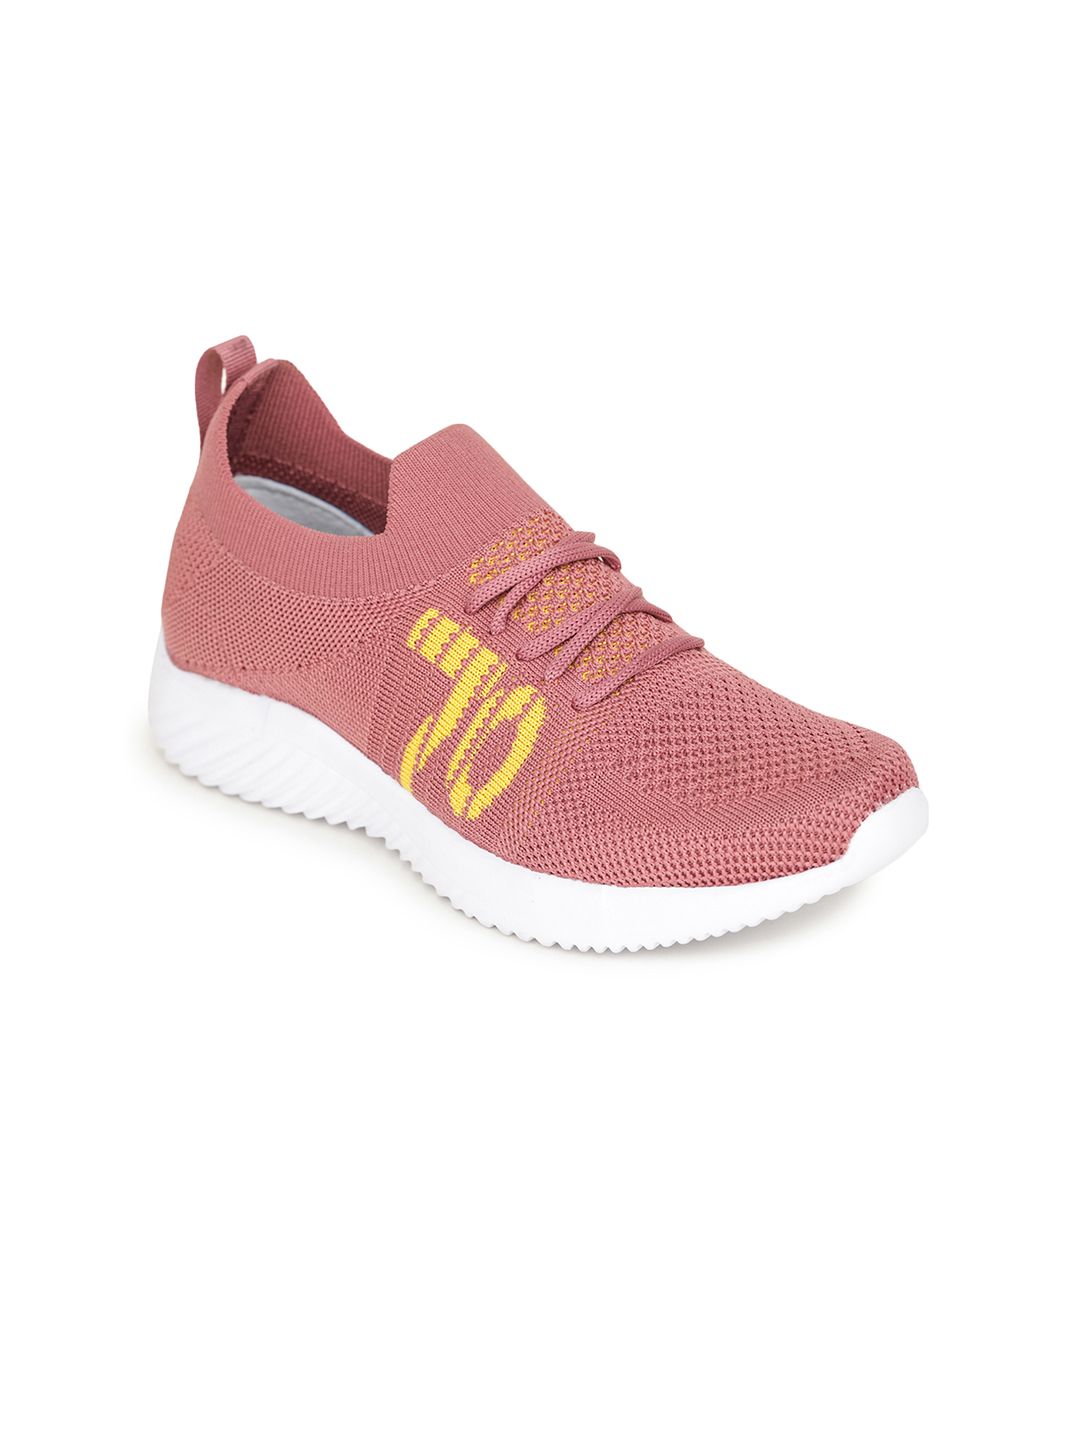 TRASE Women Pink & Yellow Mesh Running Shoes Price in India